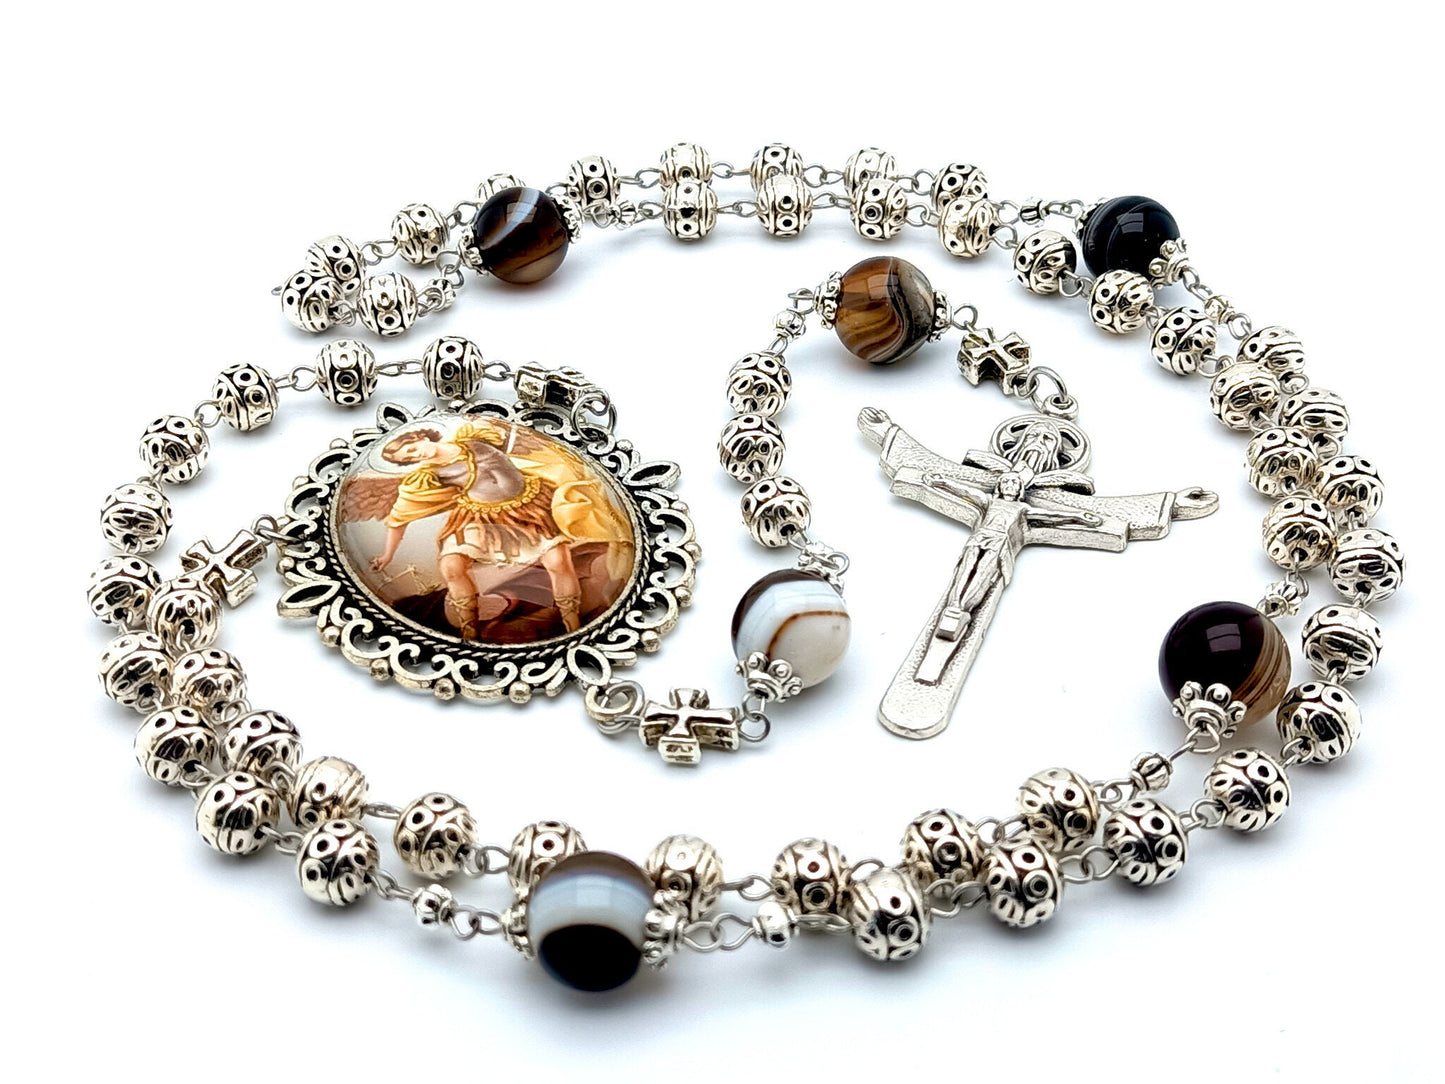 Saint Michael unique rosary beads with silver bali and gemstone beads, silver Trinity crucifix and picture centre medal.